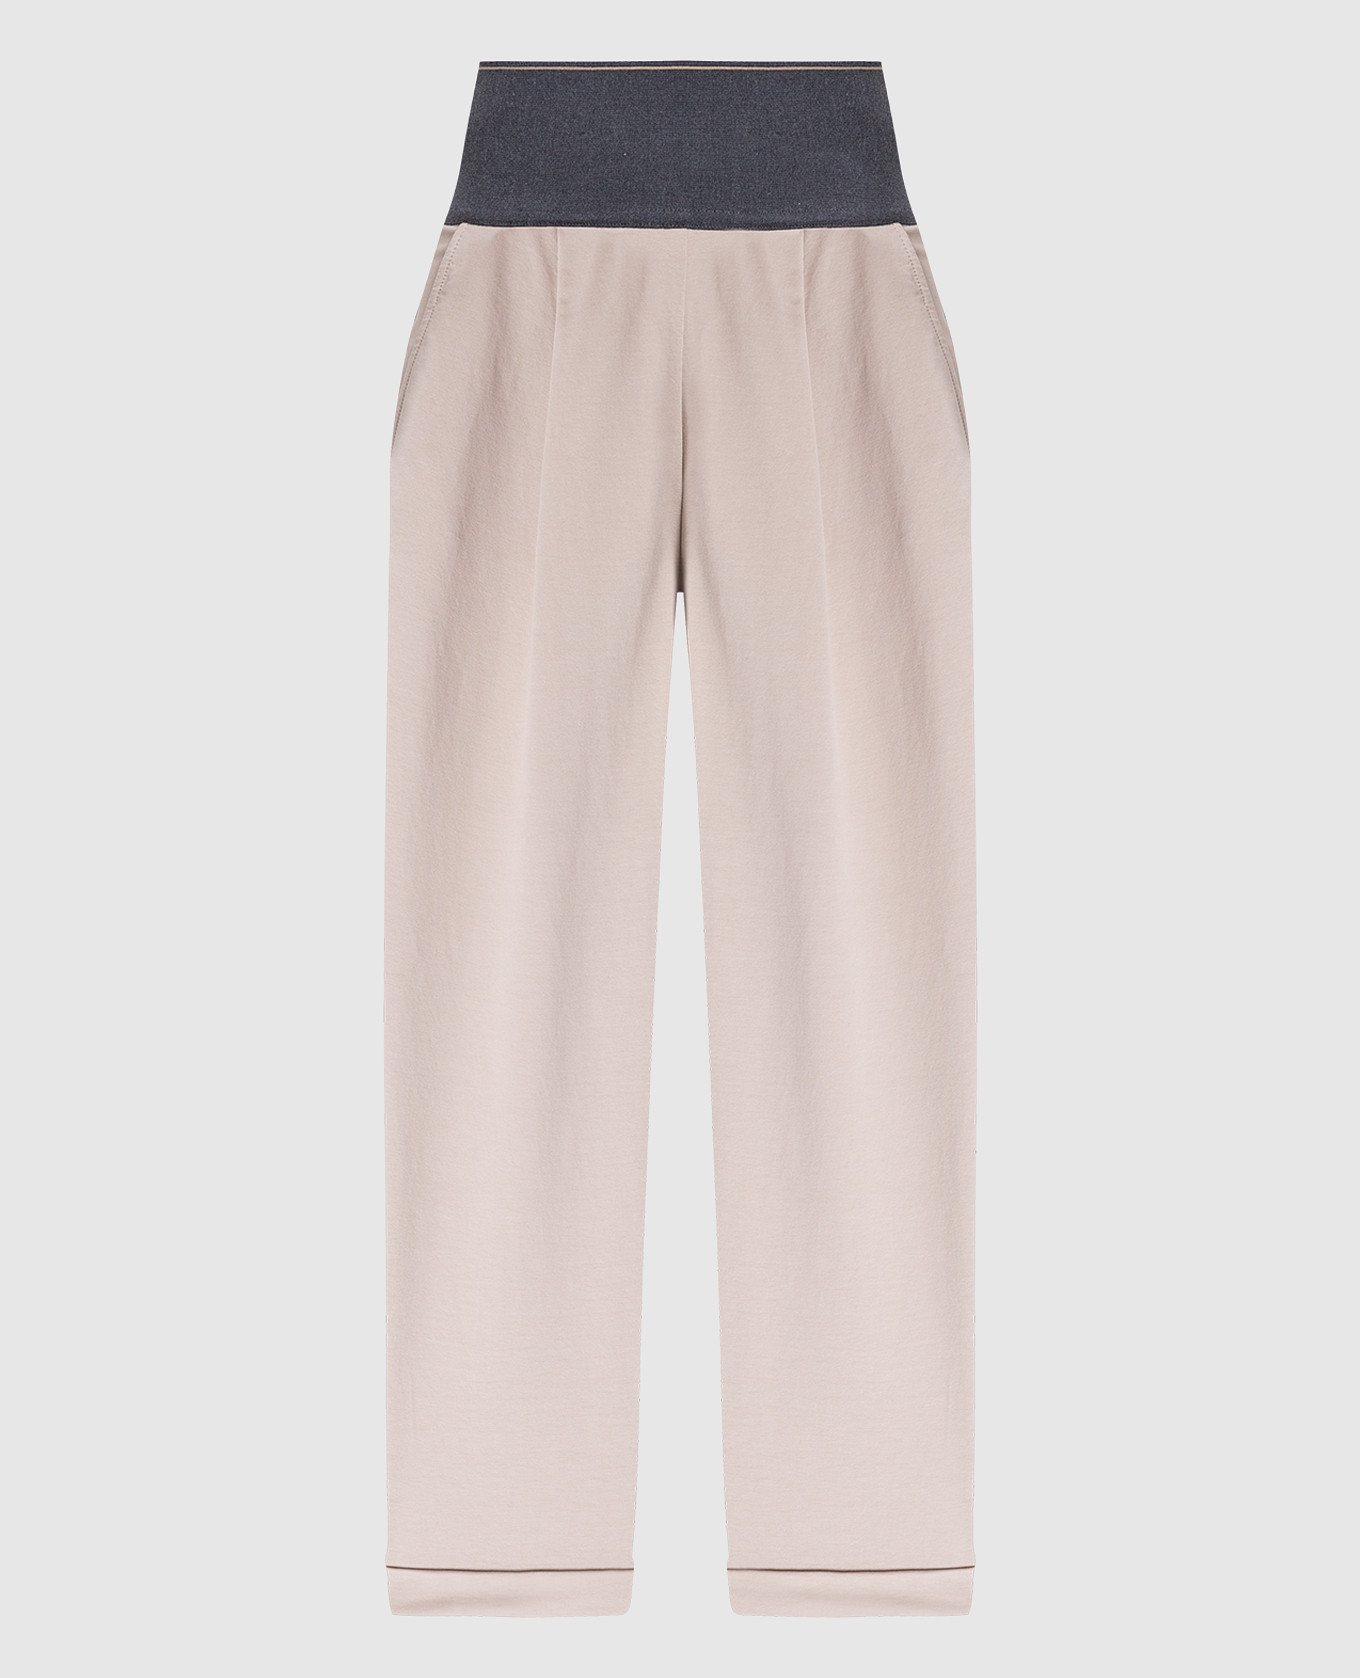 Beige trousers with a high fit